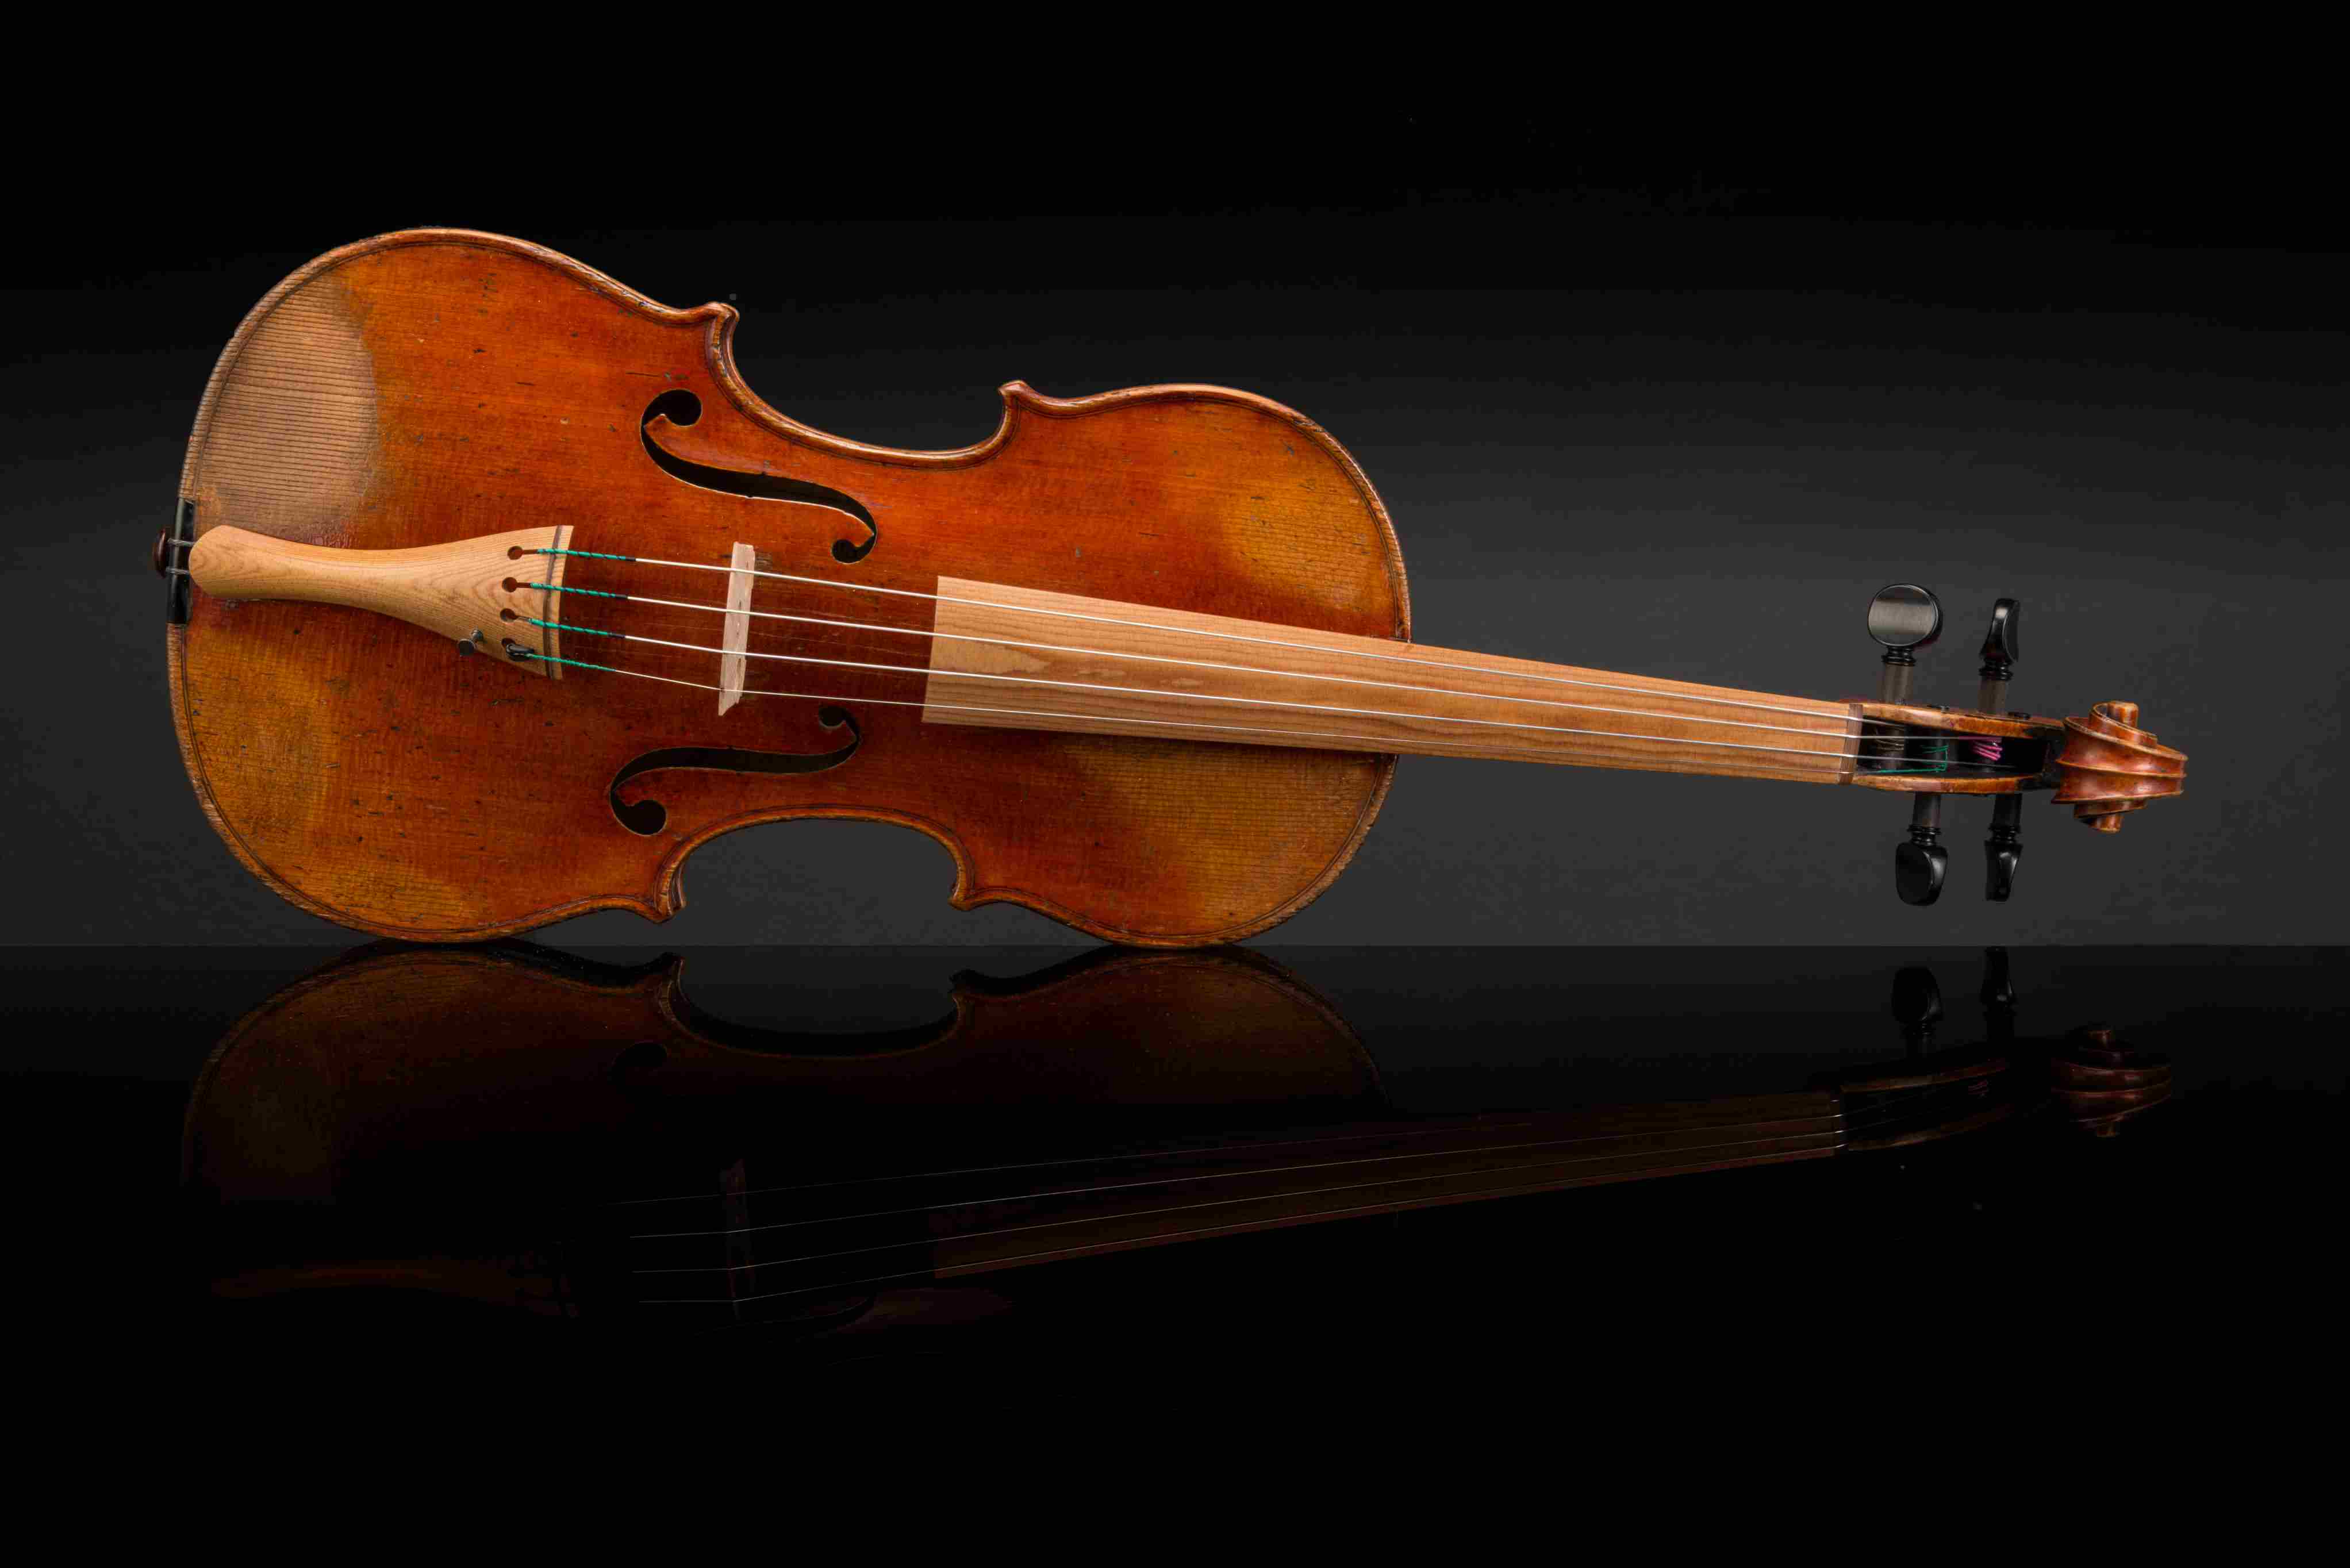 Charles Gaillard 1863 with a fingerboard and tailpiece from Sonowood spruce made by Wilhelm Geigenbau. Photo: The Strad Magazine